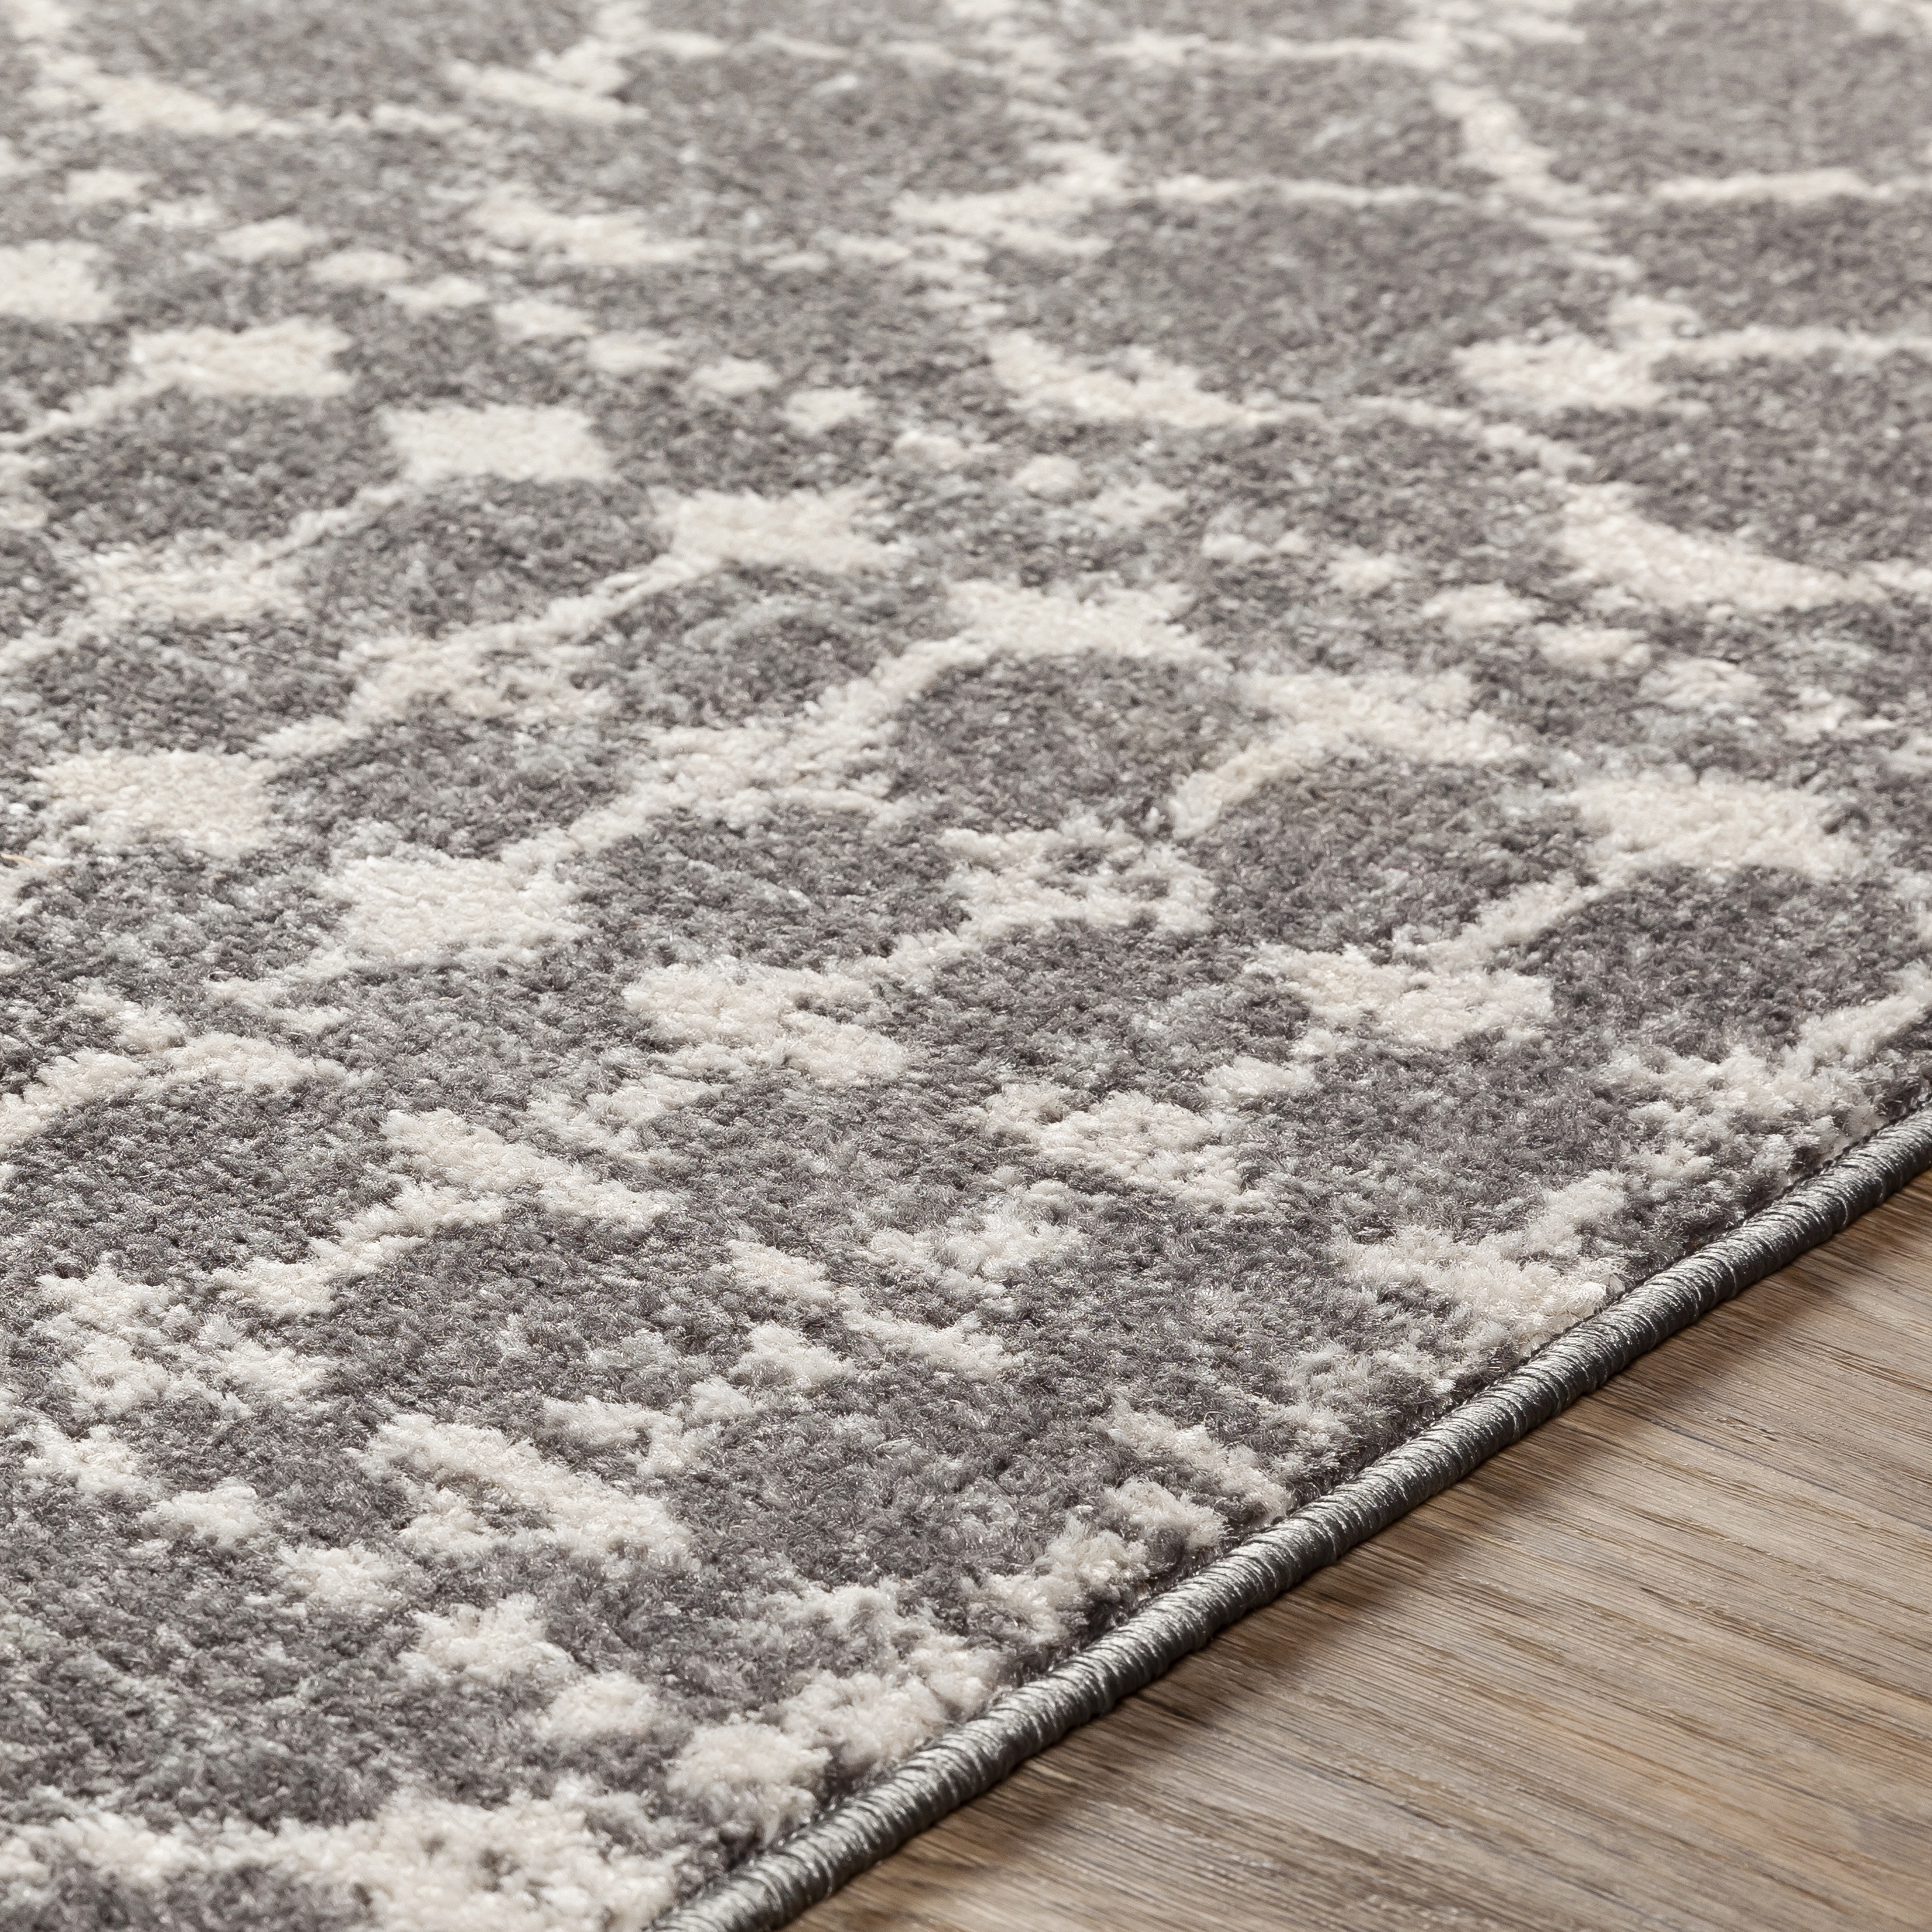 Chester Rug, 7'10" x 10'2" - Image 3